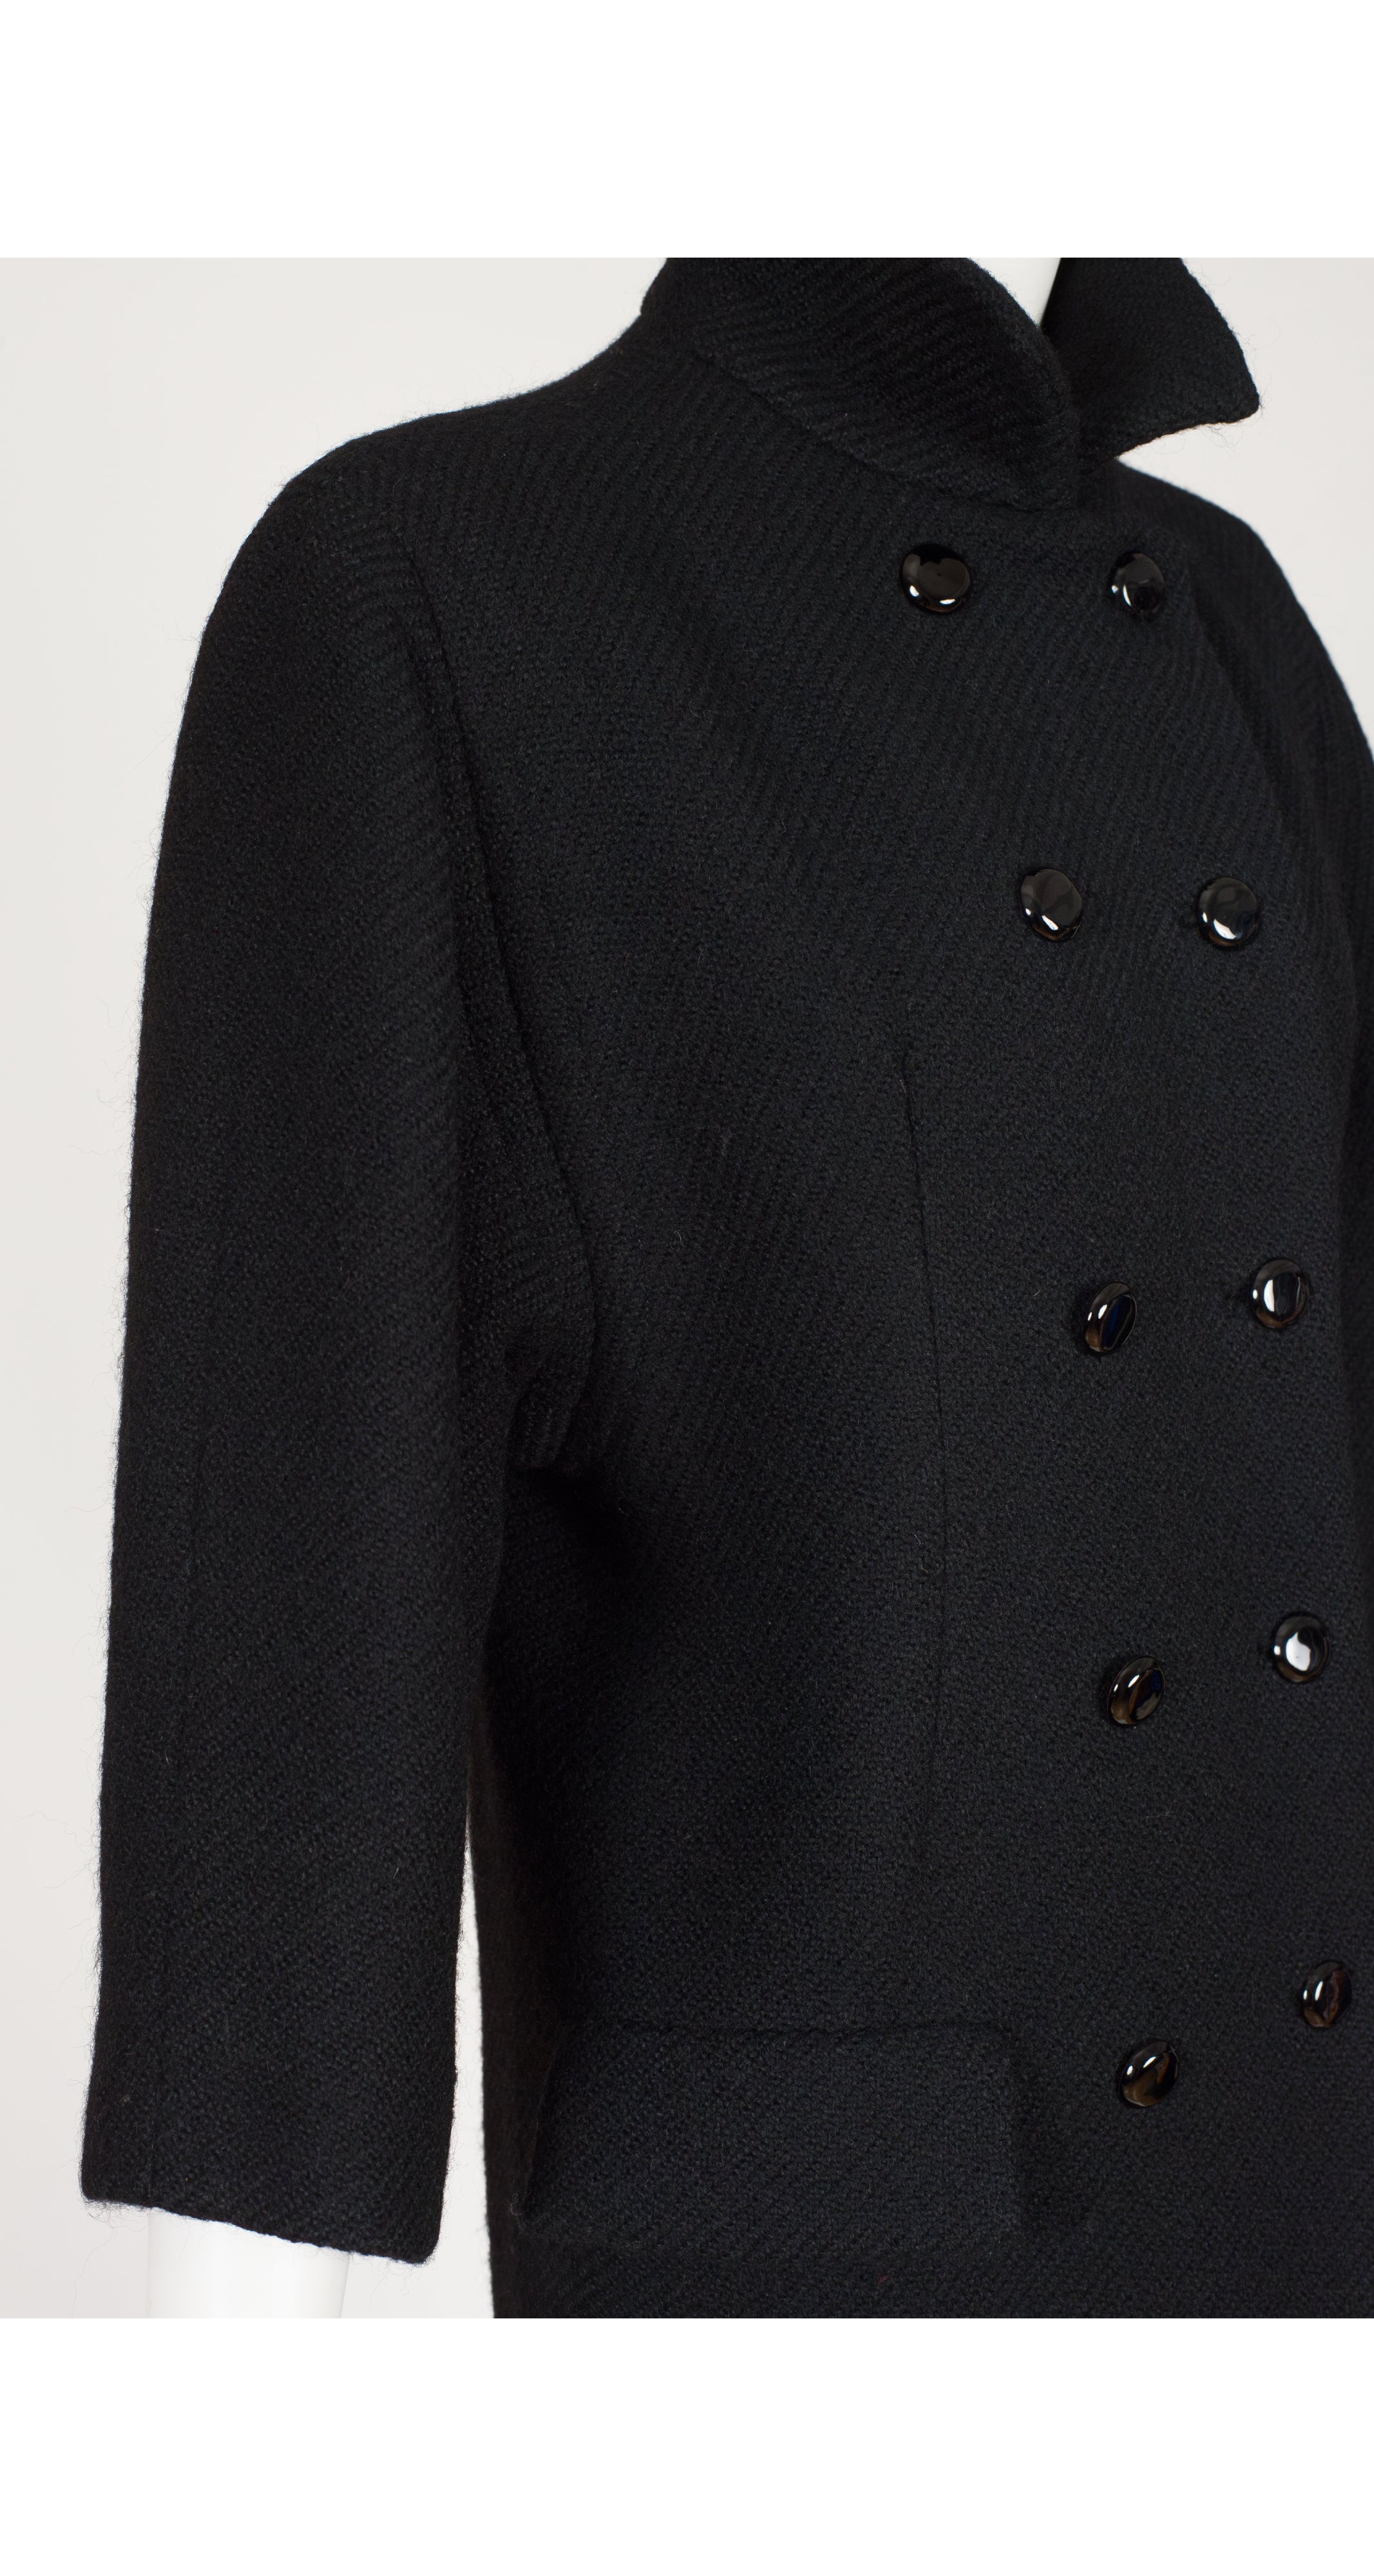 1960s Black Wool Tailored Double-Breasted Coat